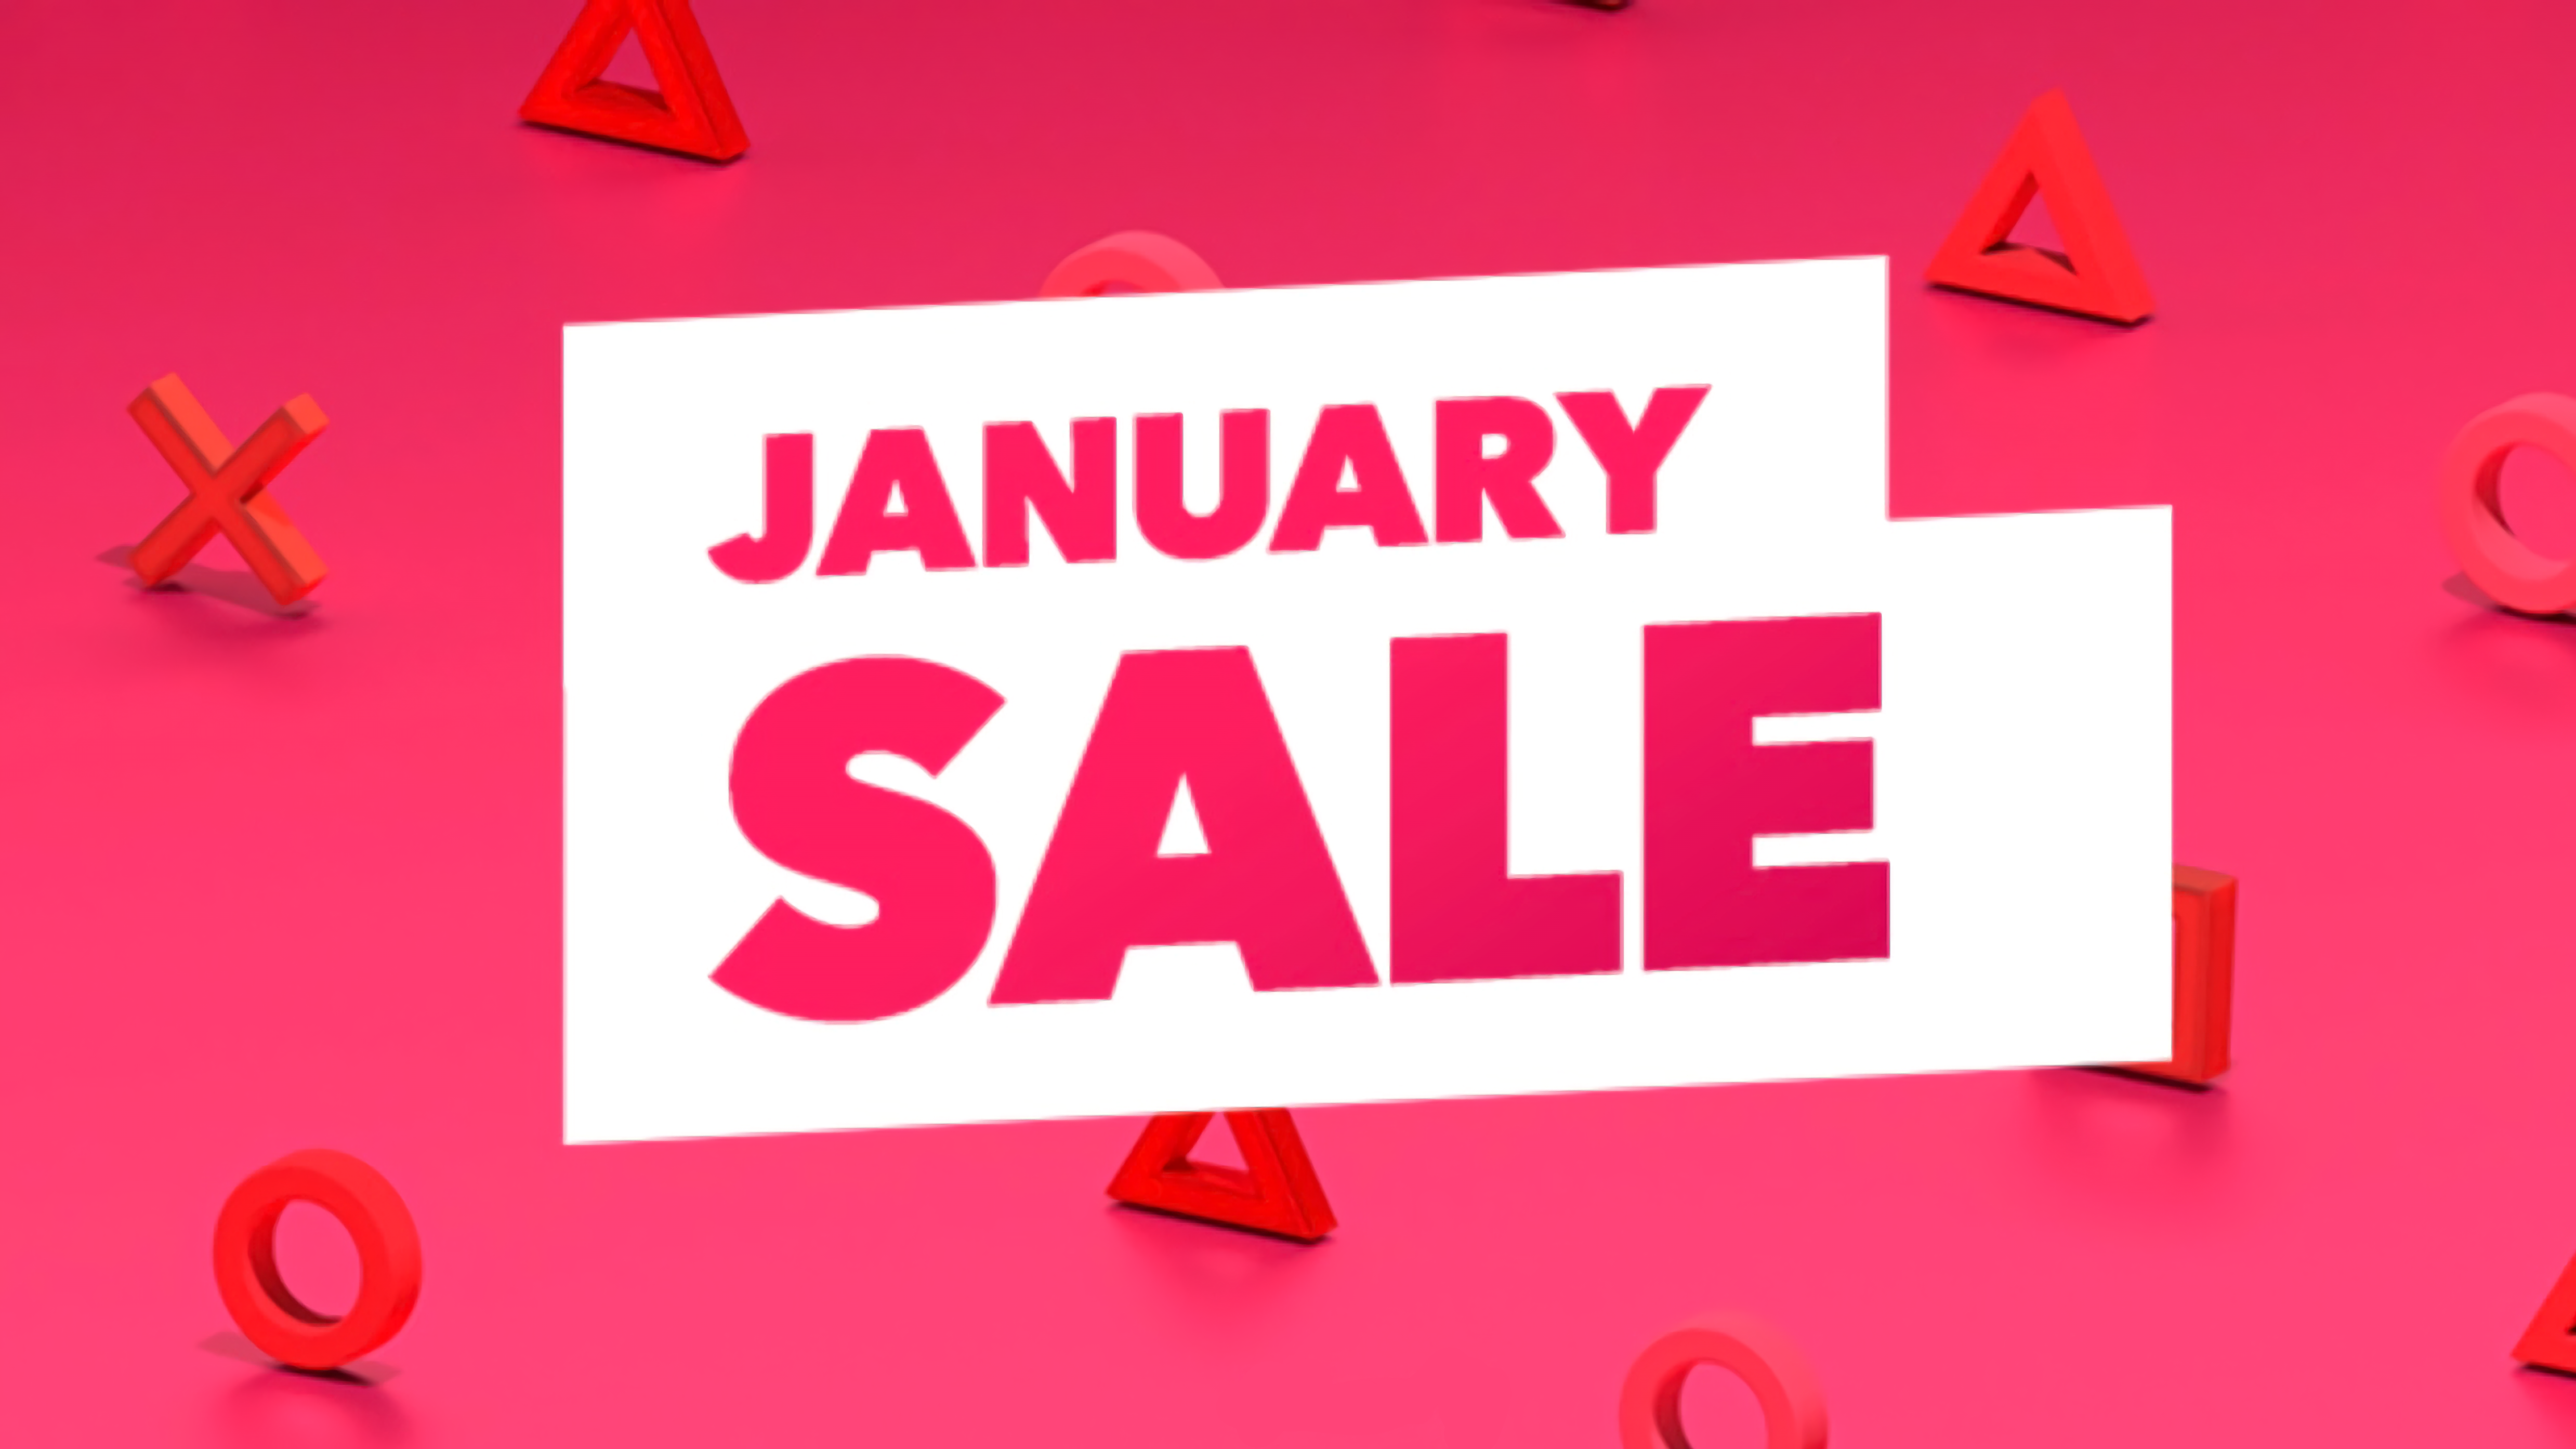 PLAYSTATION Summer sale. The january sales started and when